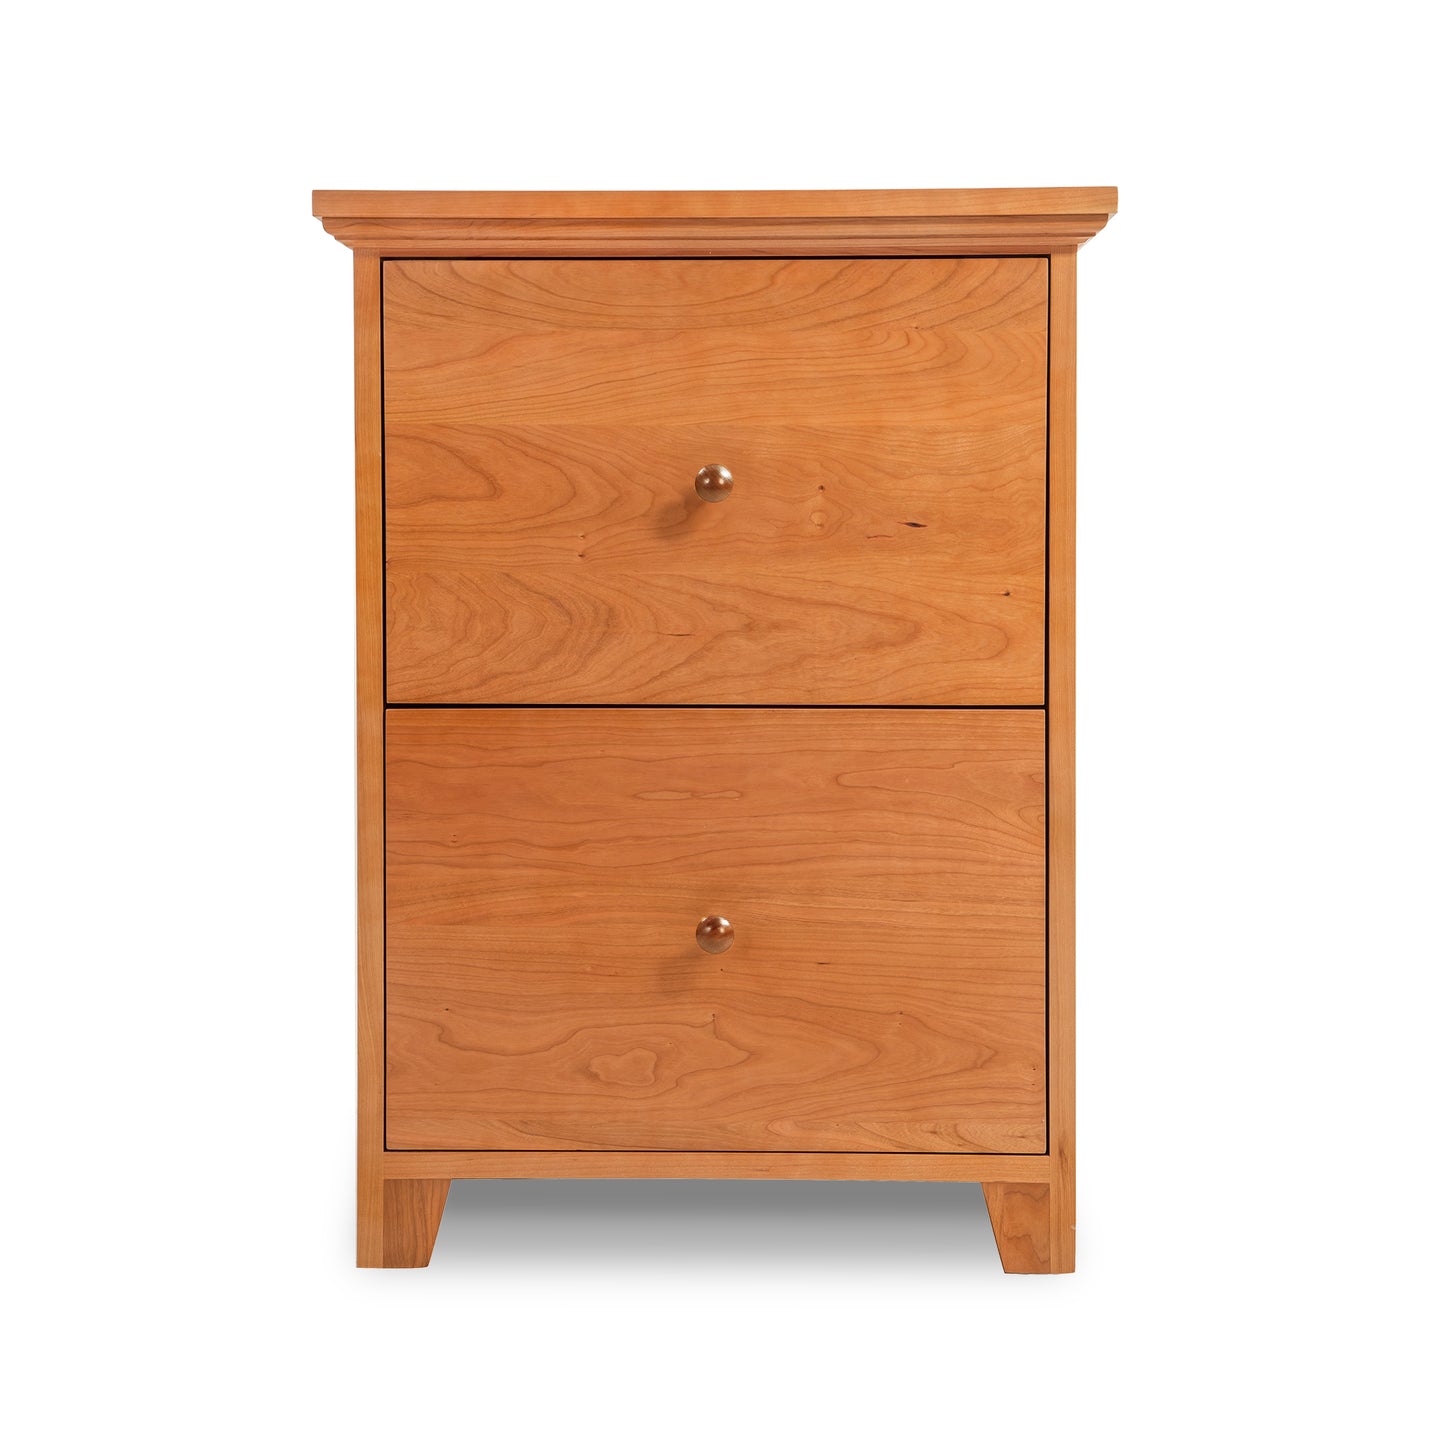 A small Shaker 2-Drawer Vertical File Cabinet with two drawers, crafted from cherry wood, manufactured by Lyndon Furniture.